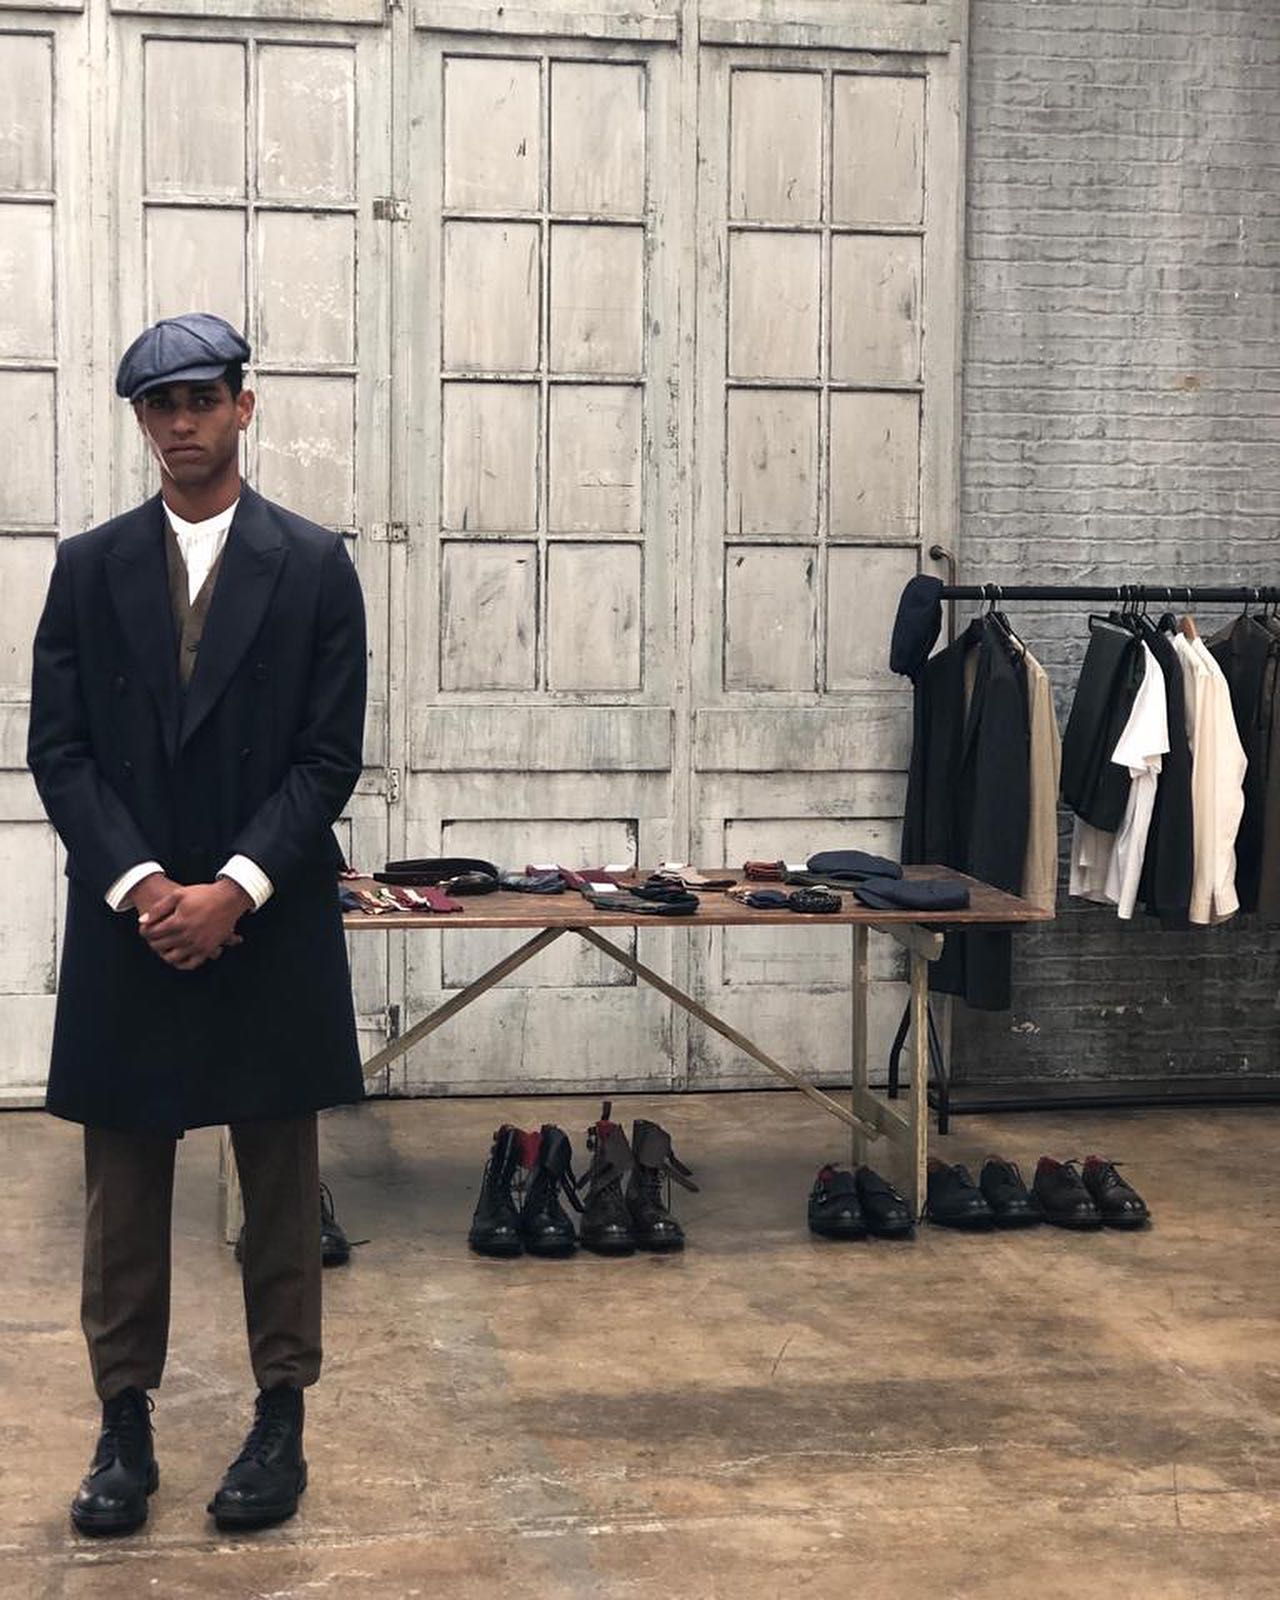 Following our catwalk show in January where the collaboration with hit series Peaky Blinders was first shown, we are proud to announce the collection’s release.